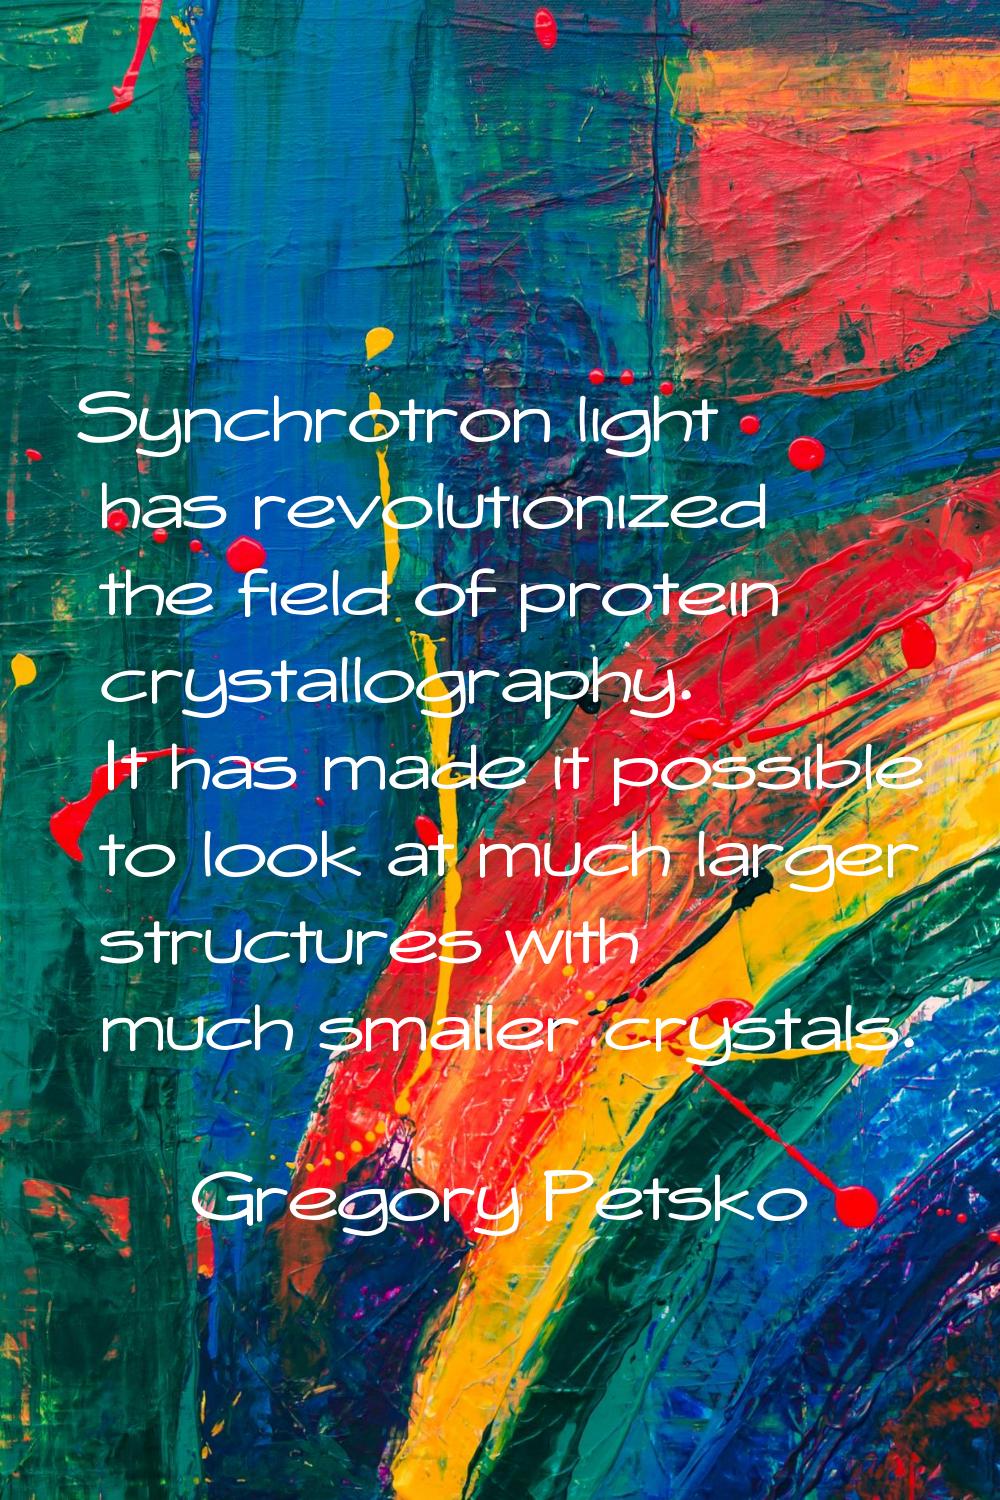 Synchrotron light has revolutionized the field of protein crystallography. It has made it possible 